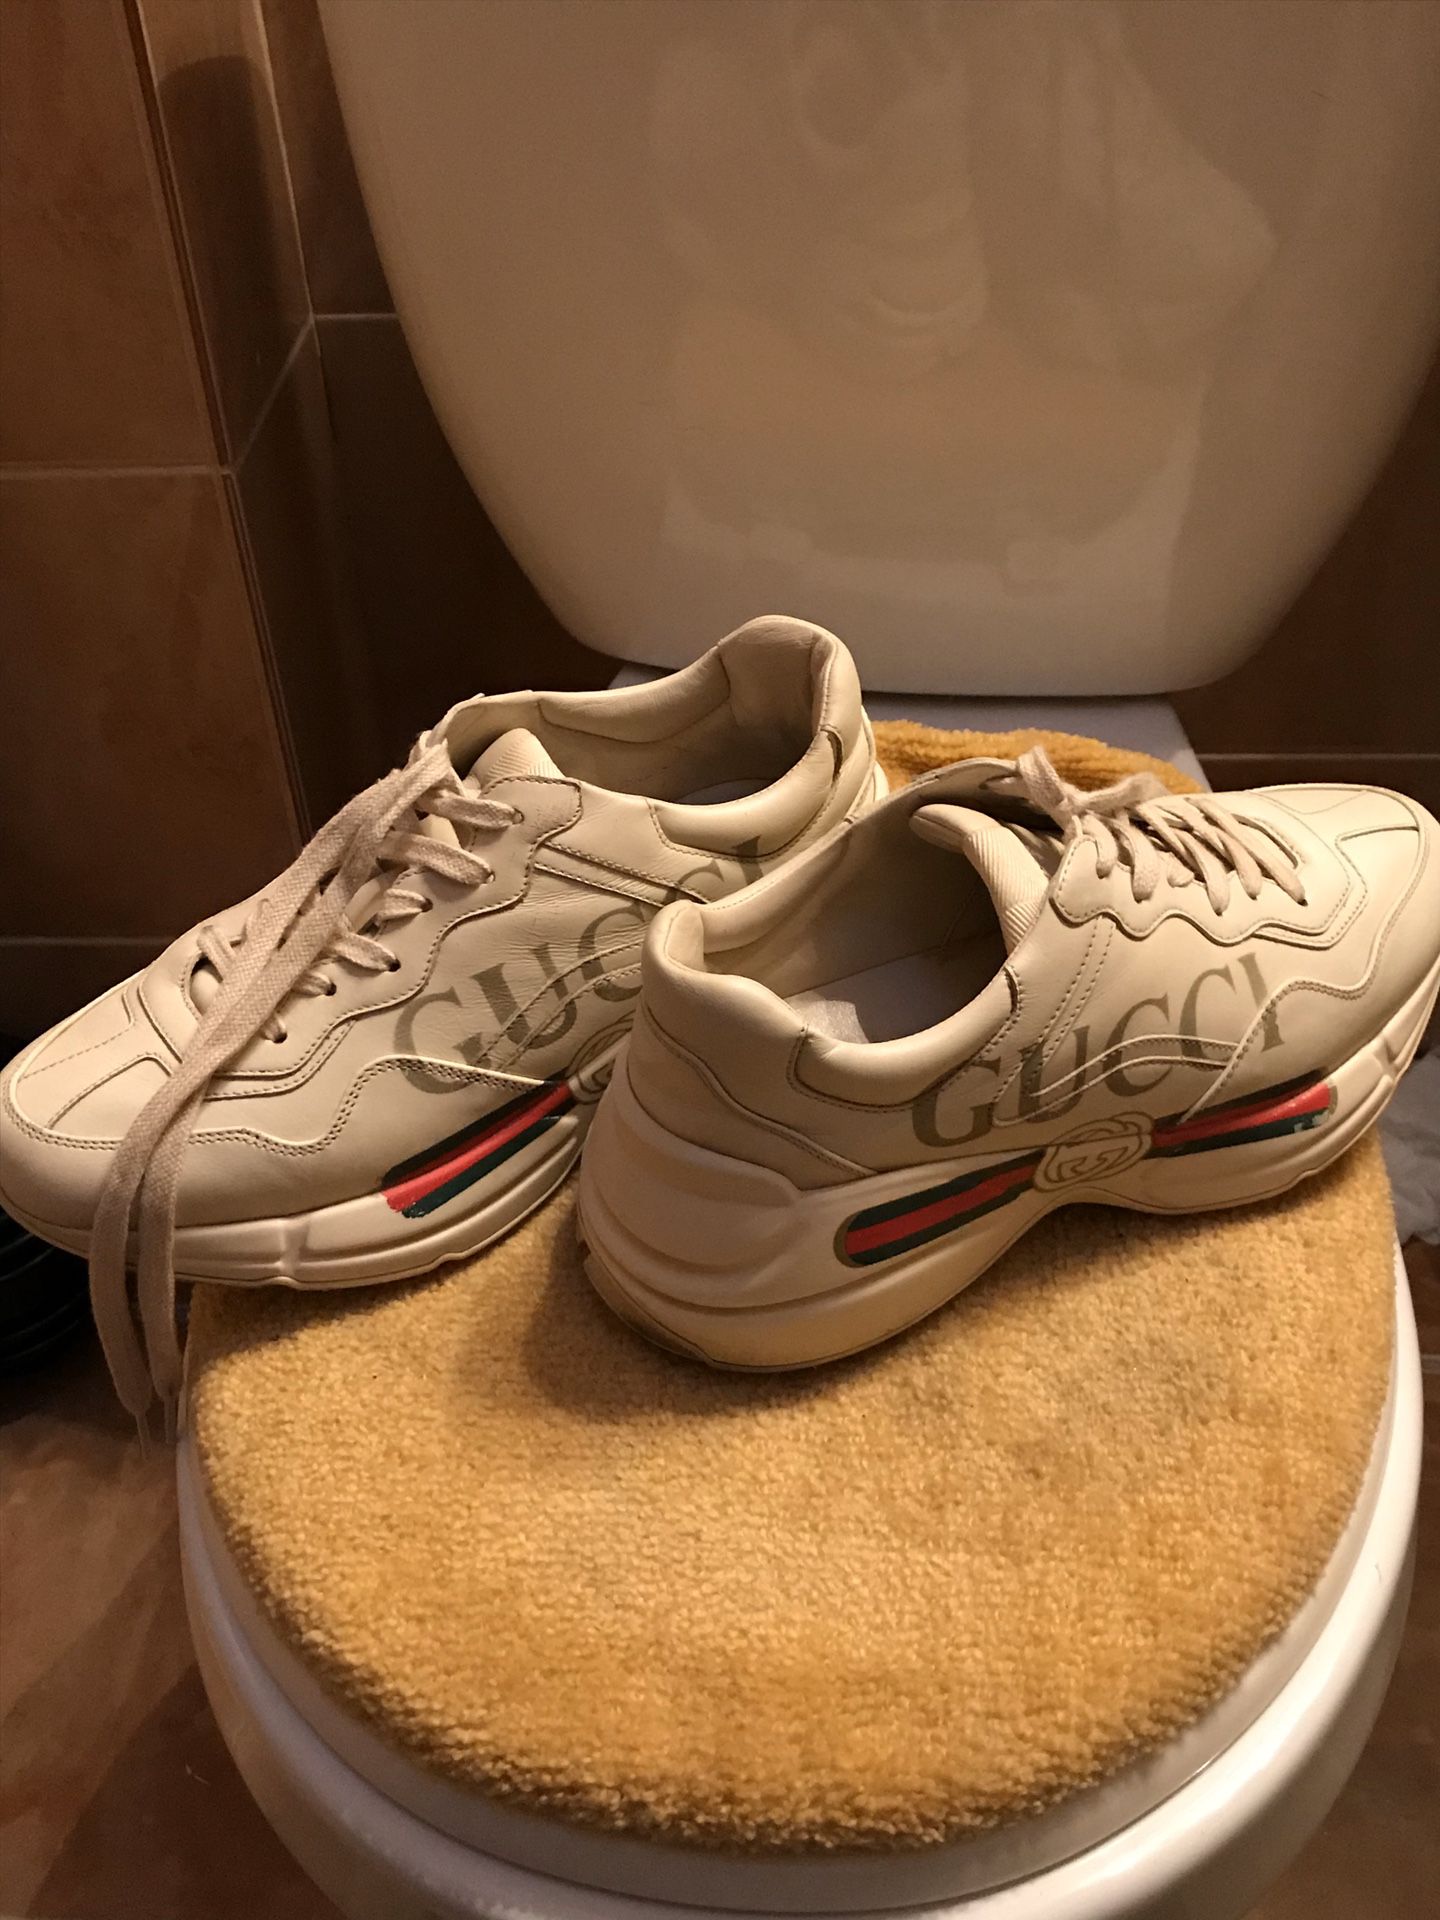 Gucci sneaker Old had for year and a half in my closet just want them out 200$ if u wear real shit then you know they real 🤷🏾‍♂️ want them say a pric